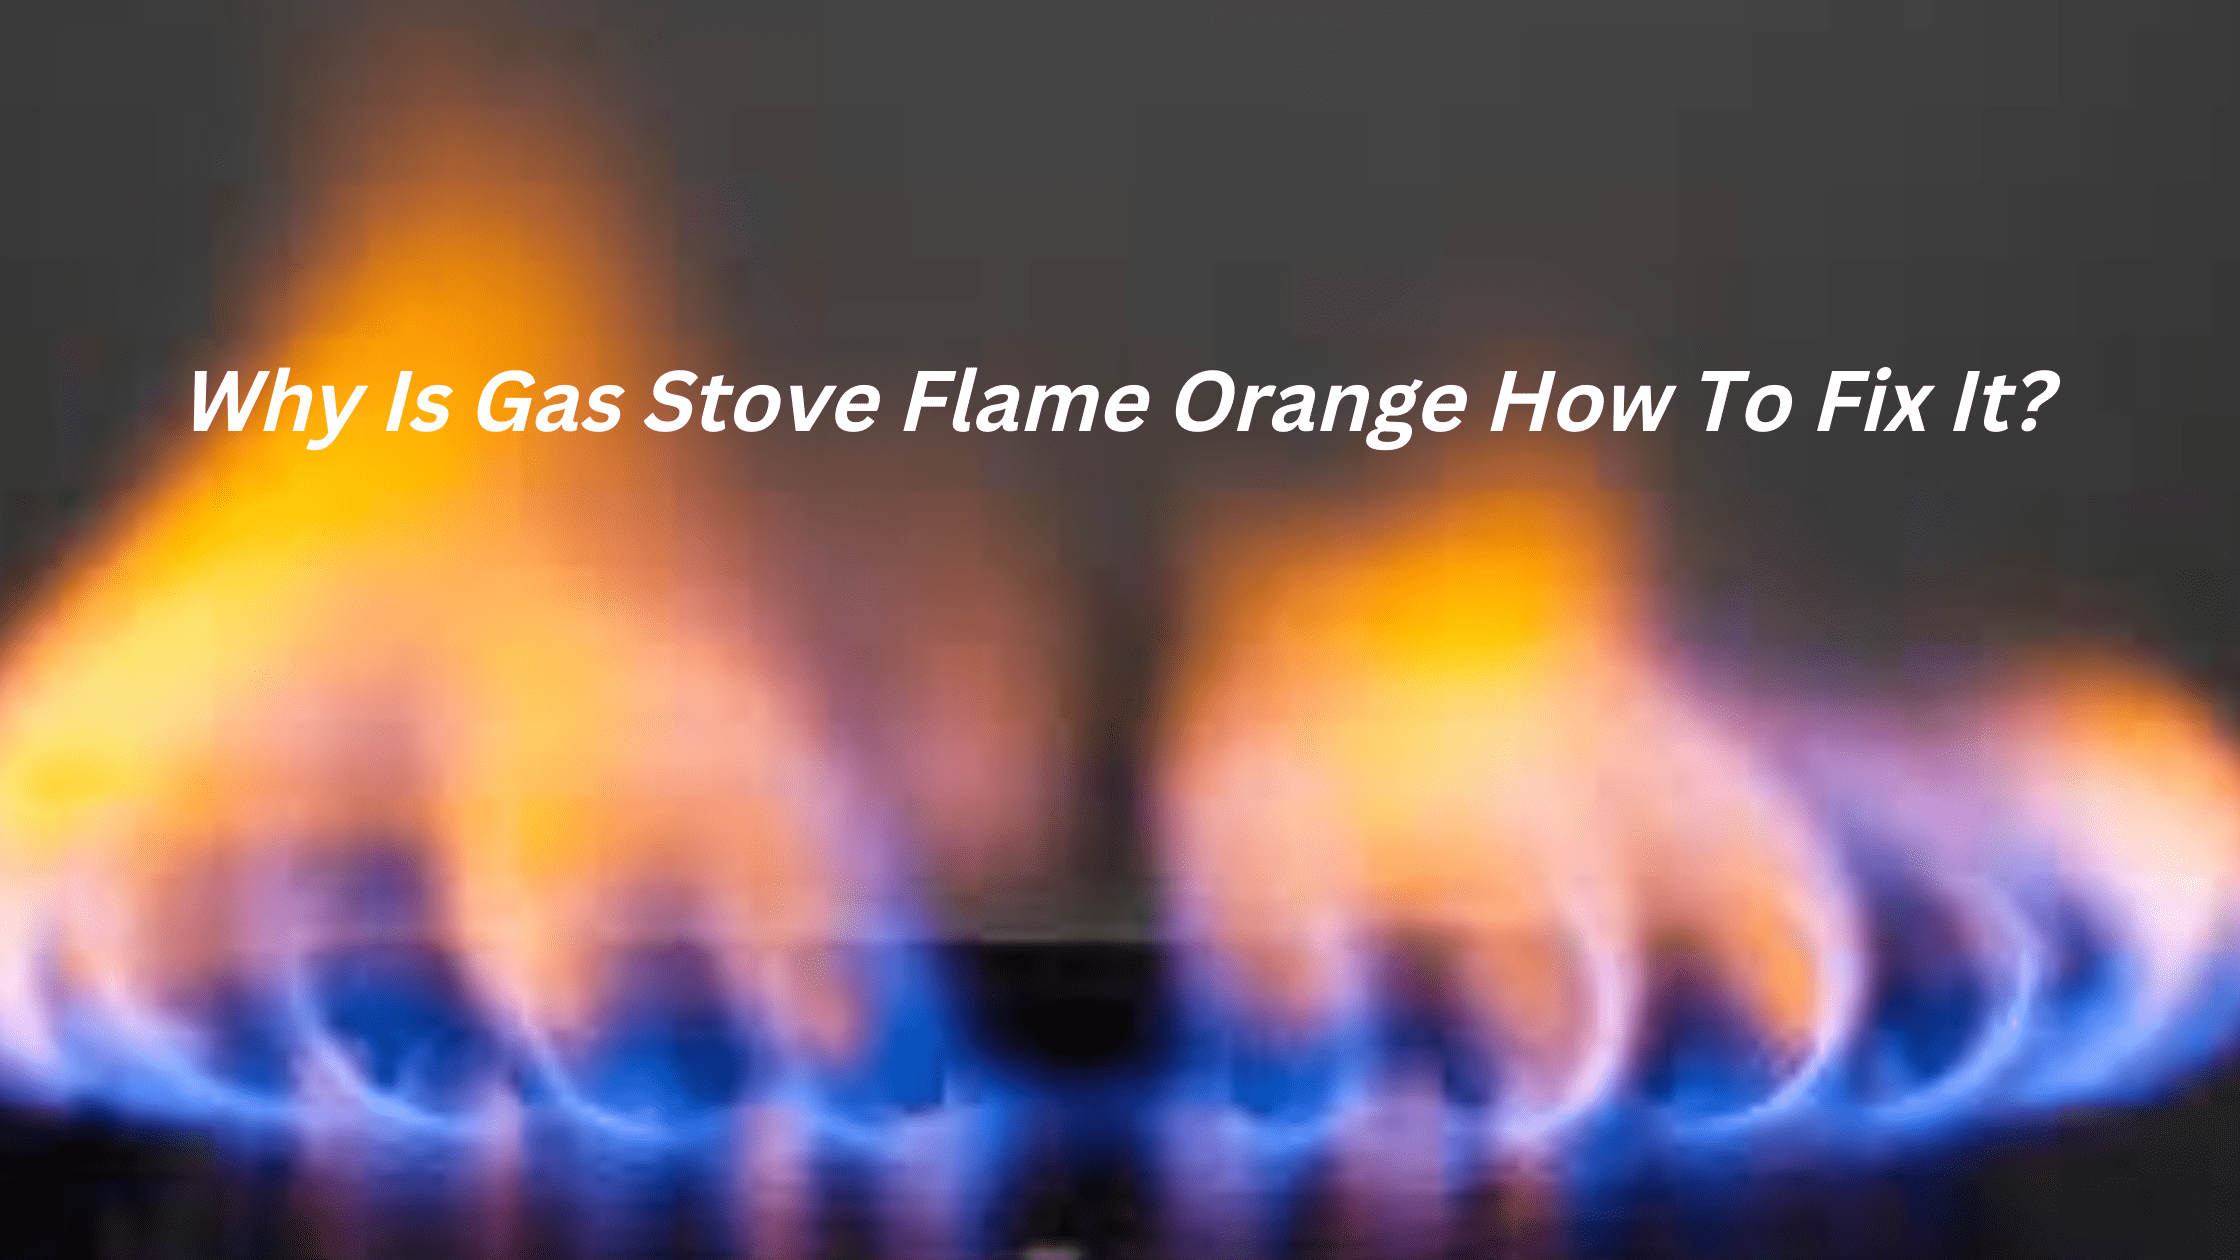 Why Is Gas Stove Flame Orange How To Fix It?